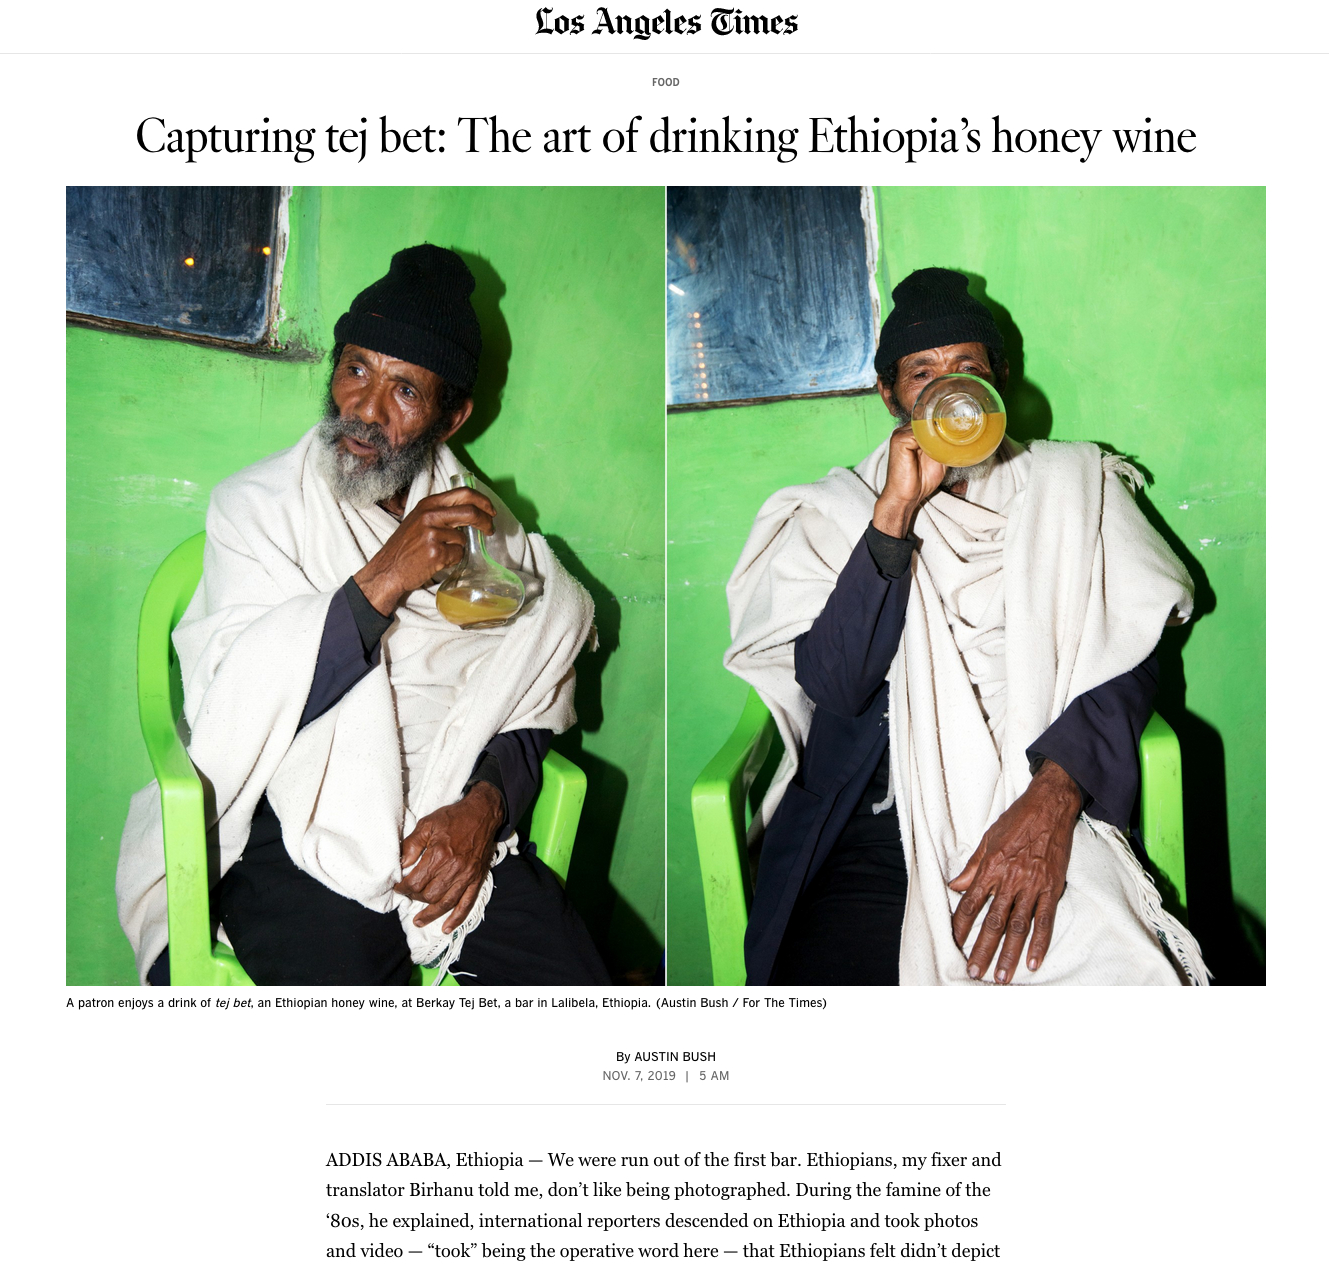  Text &amp; photos: “ Capturing tej bet: The art of drinking Ethiopia’s honey wine, ” Los Angeles Times 